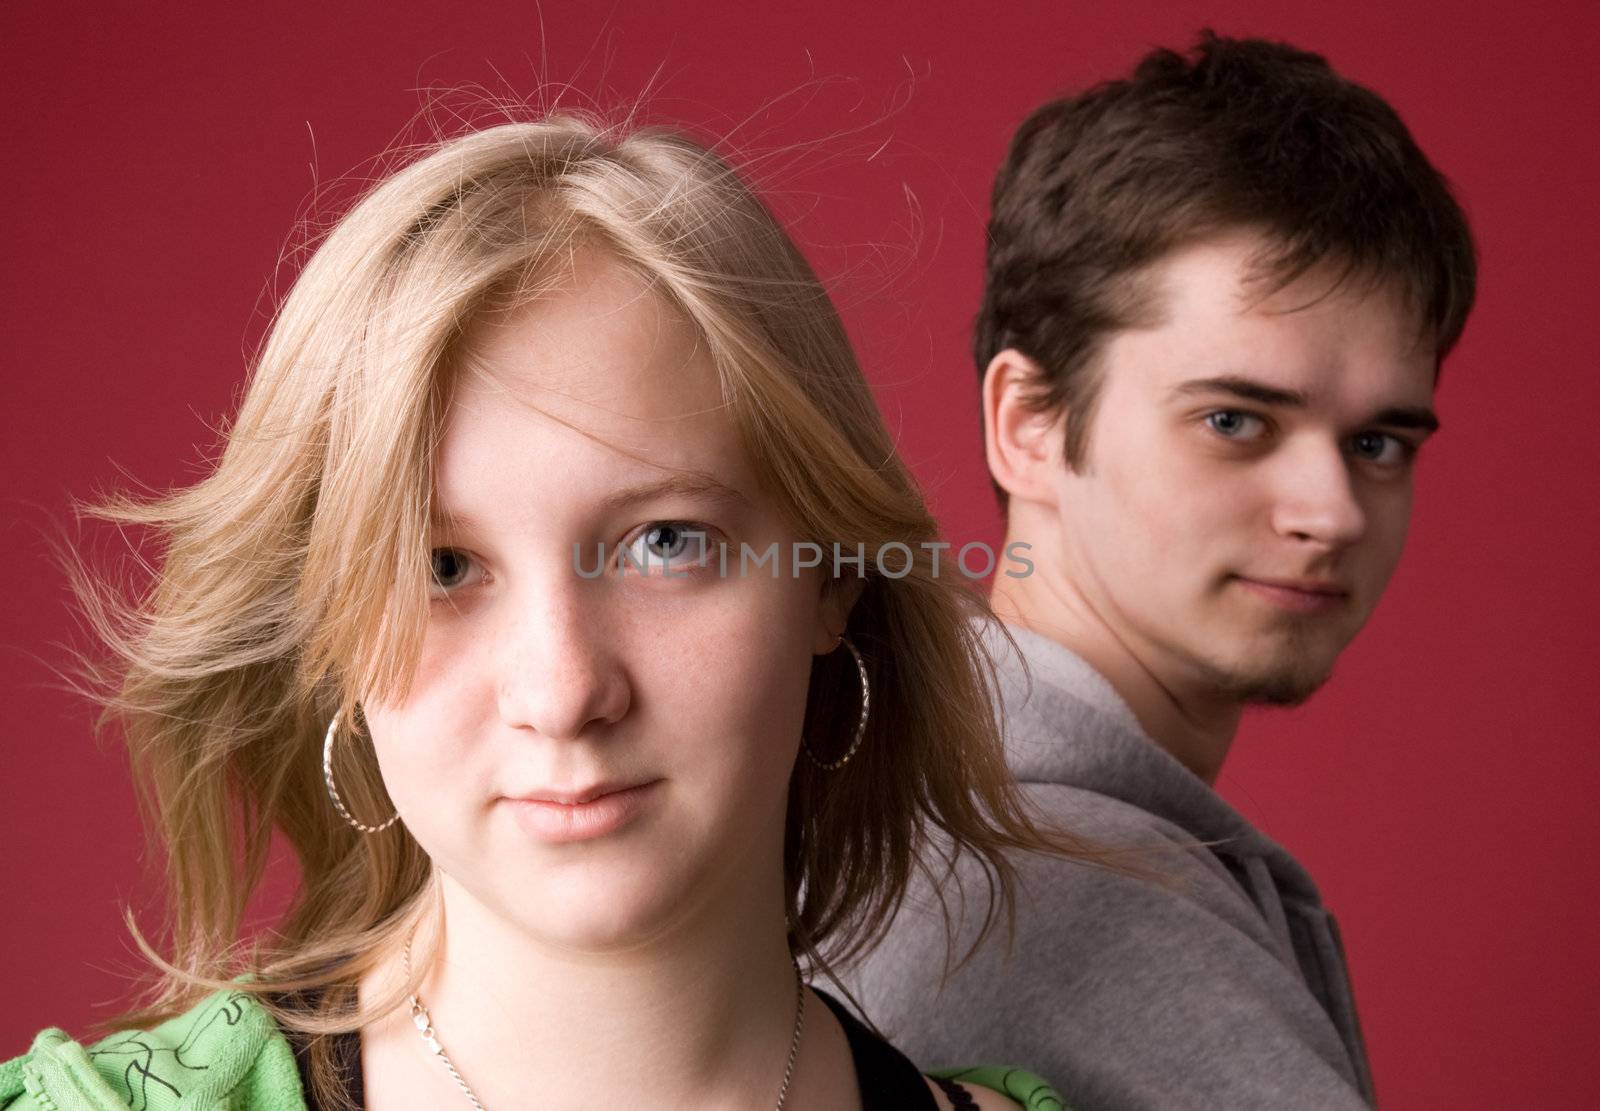 The young girl and the guy on a red background.